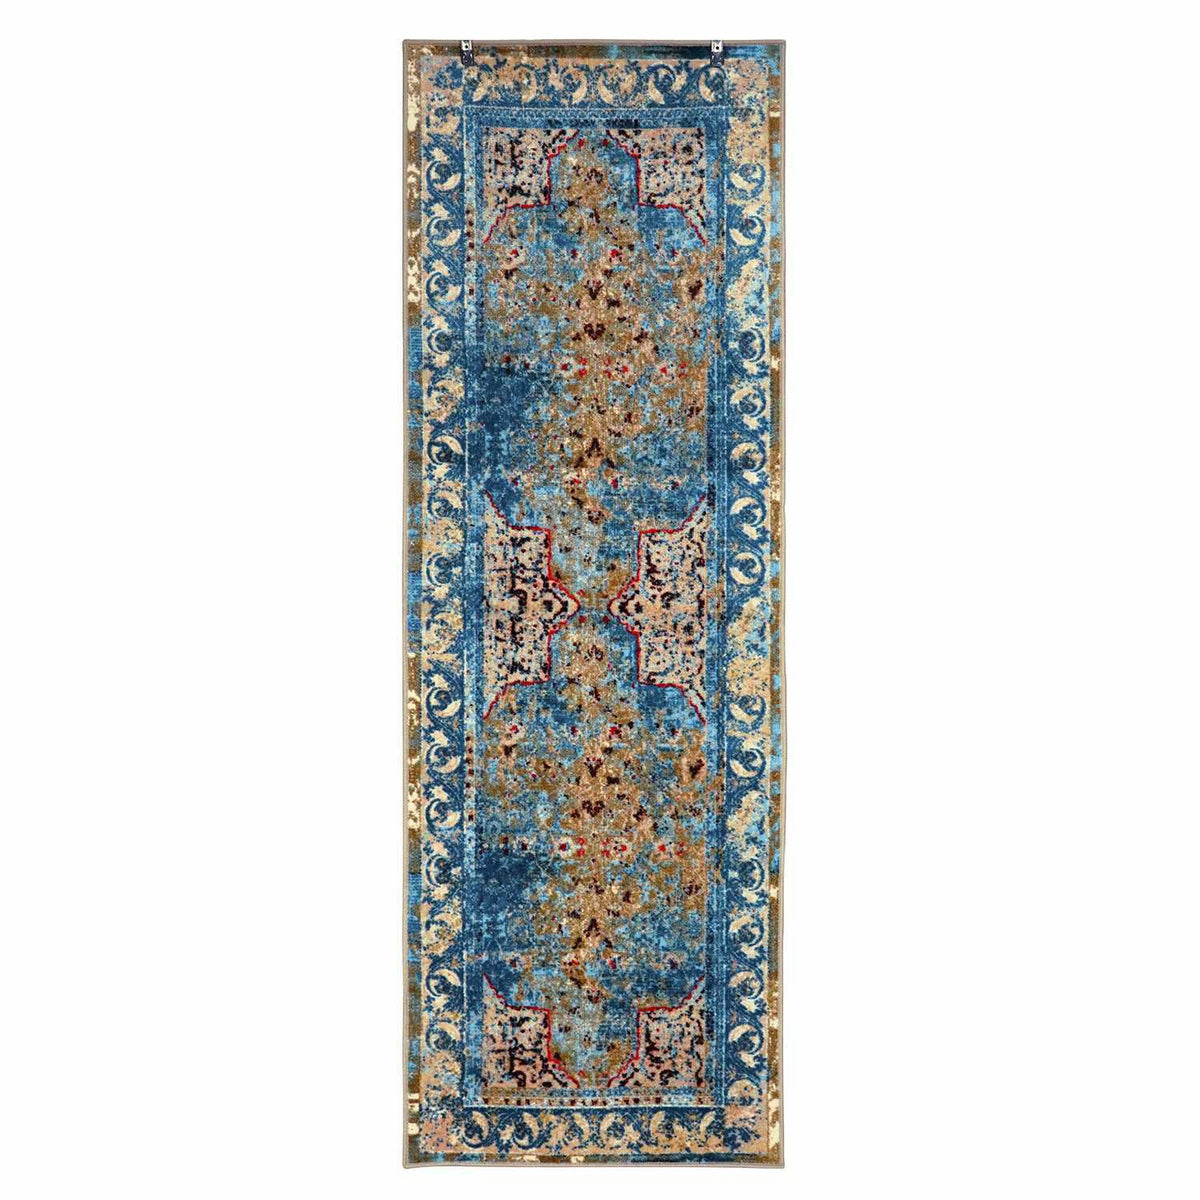 Superior Angeles Overdyed Non-Slip Indoor Area Rug or Runner -  Blue